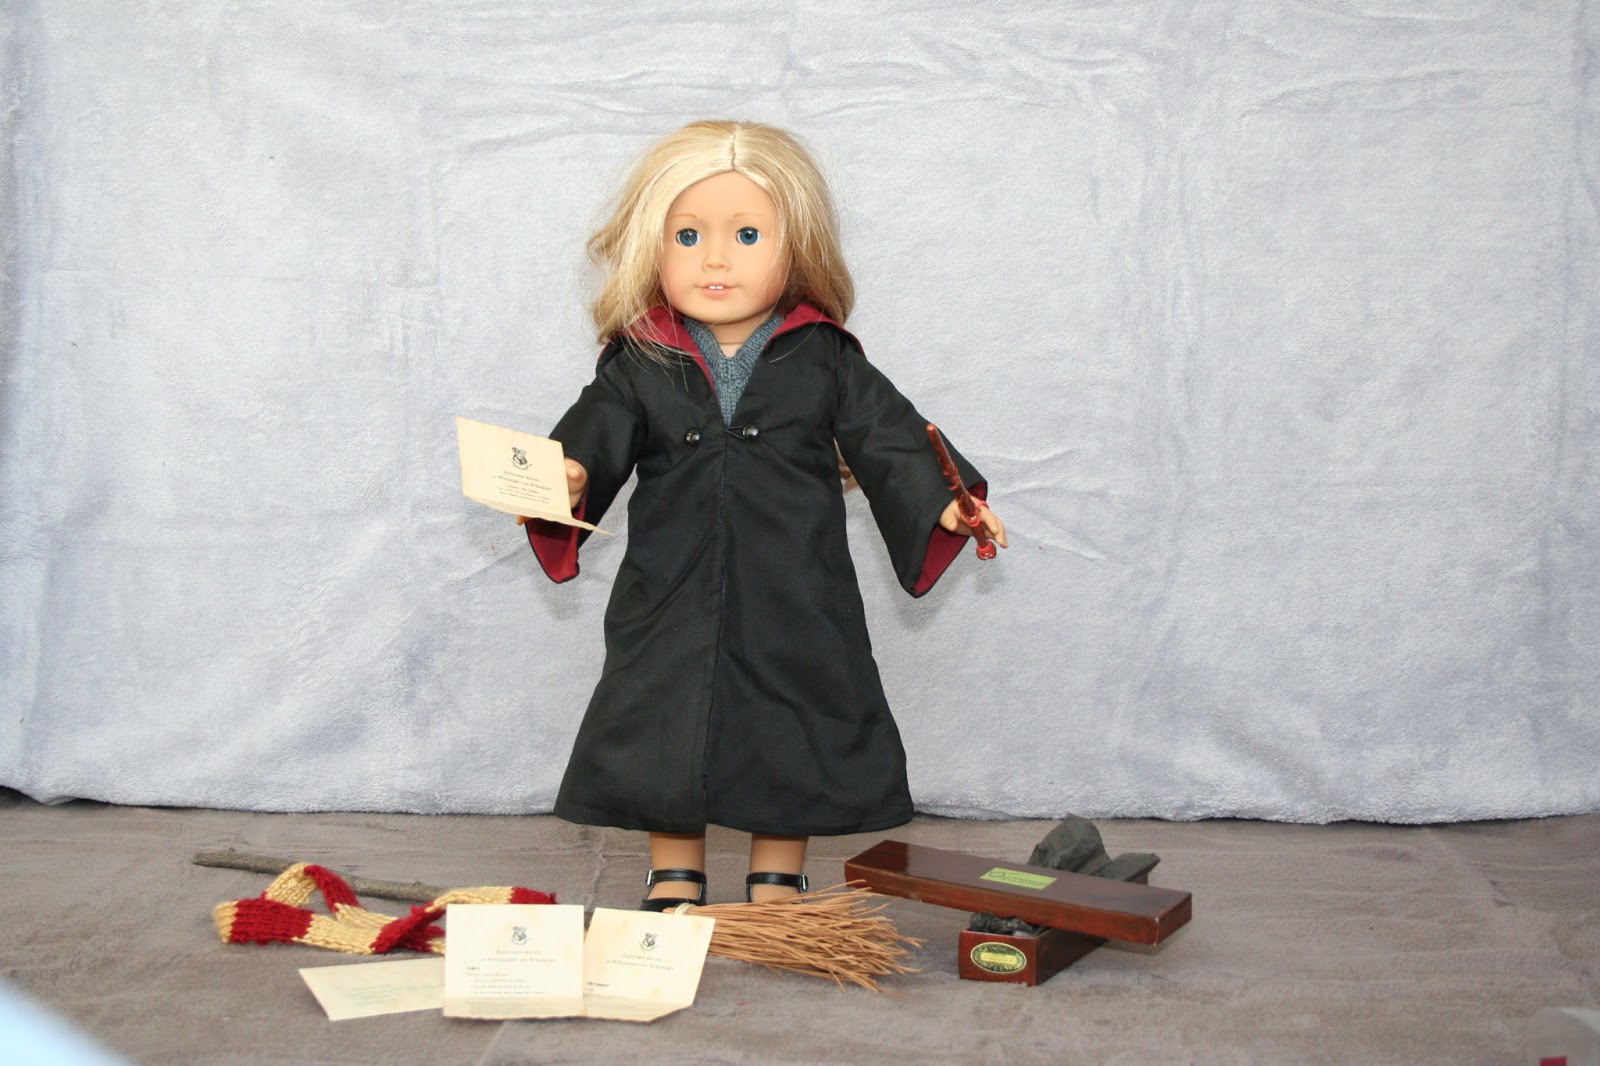 arts-and-crafts-for-your-american-girl-doll-harry-potter-for-your